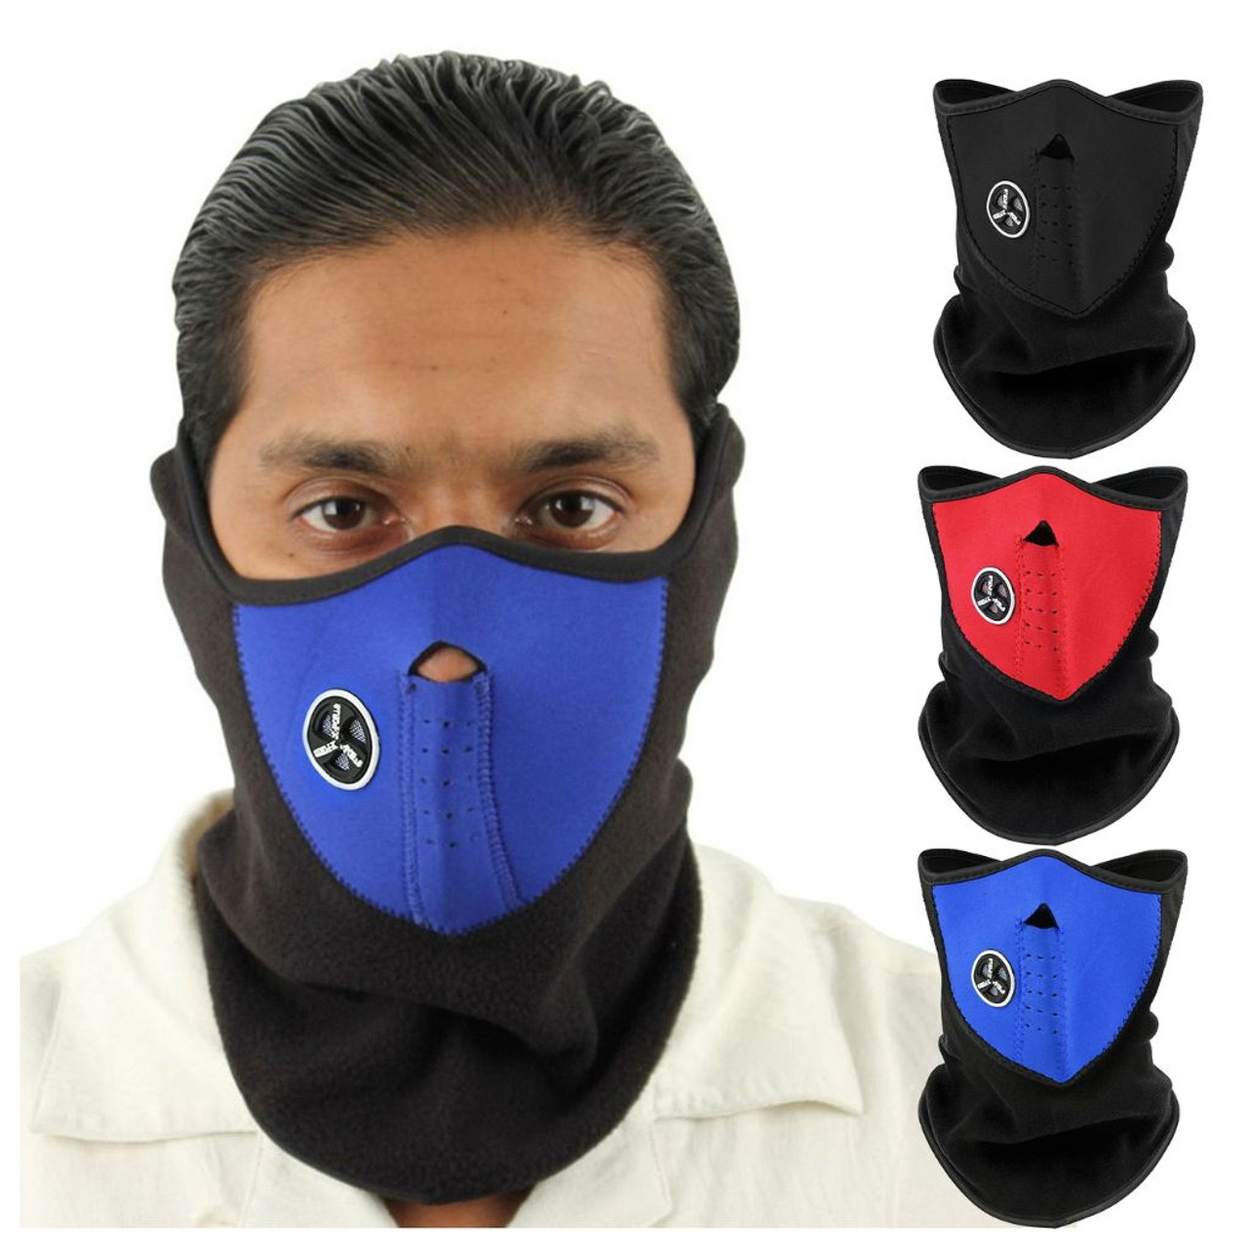 3-Pack: Men's Warm Winter Windproof Breathable Cozy Thermal Balaclava Winter Ski Face Mask - Black